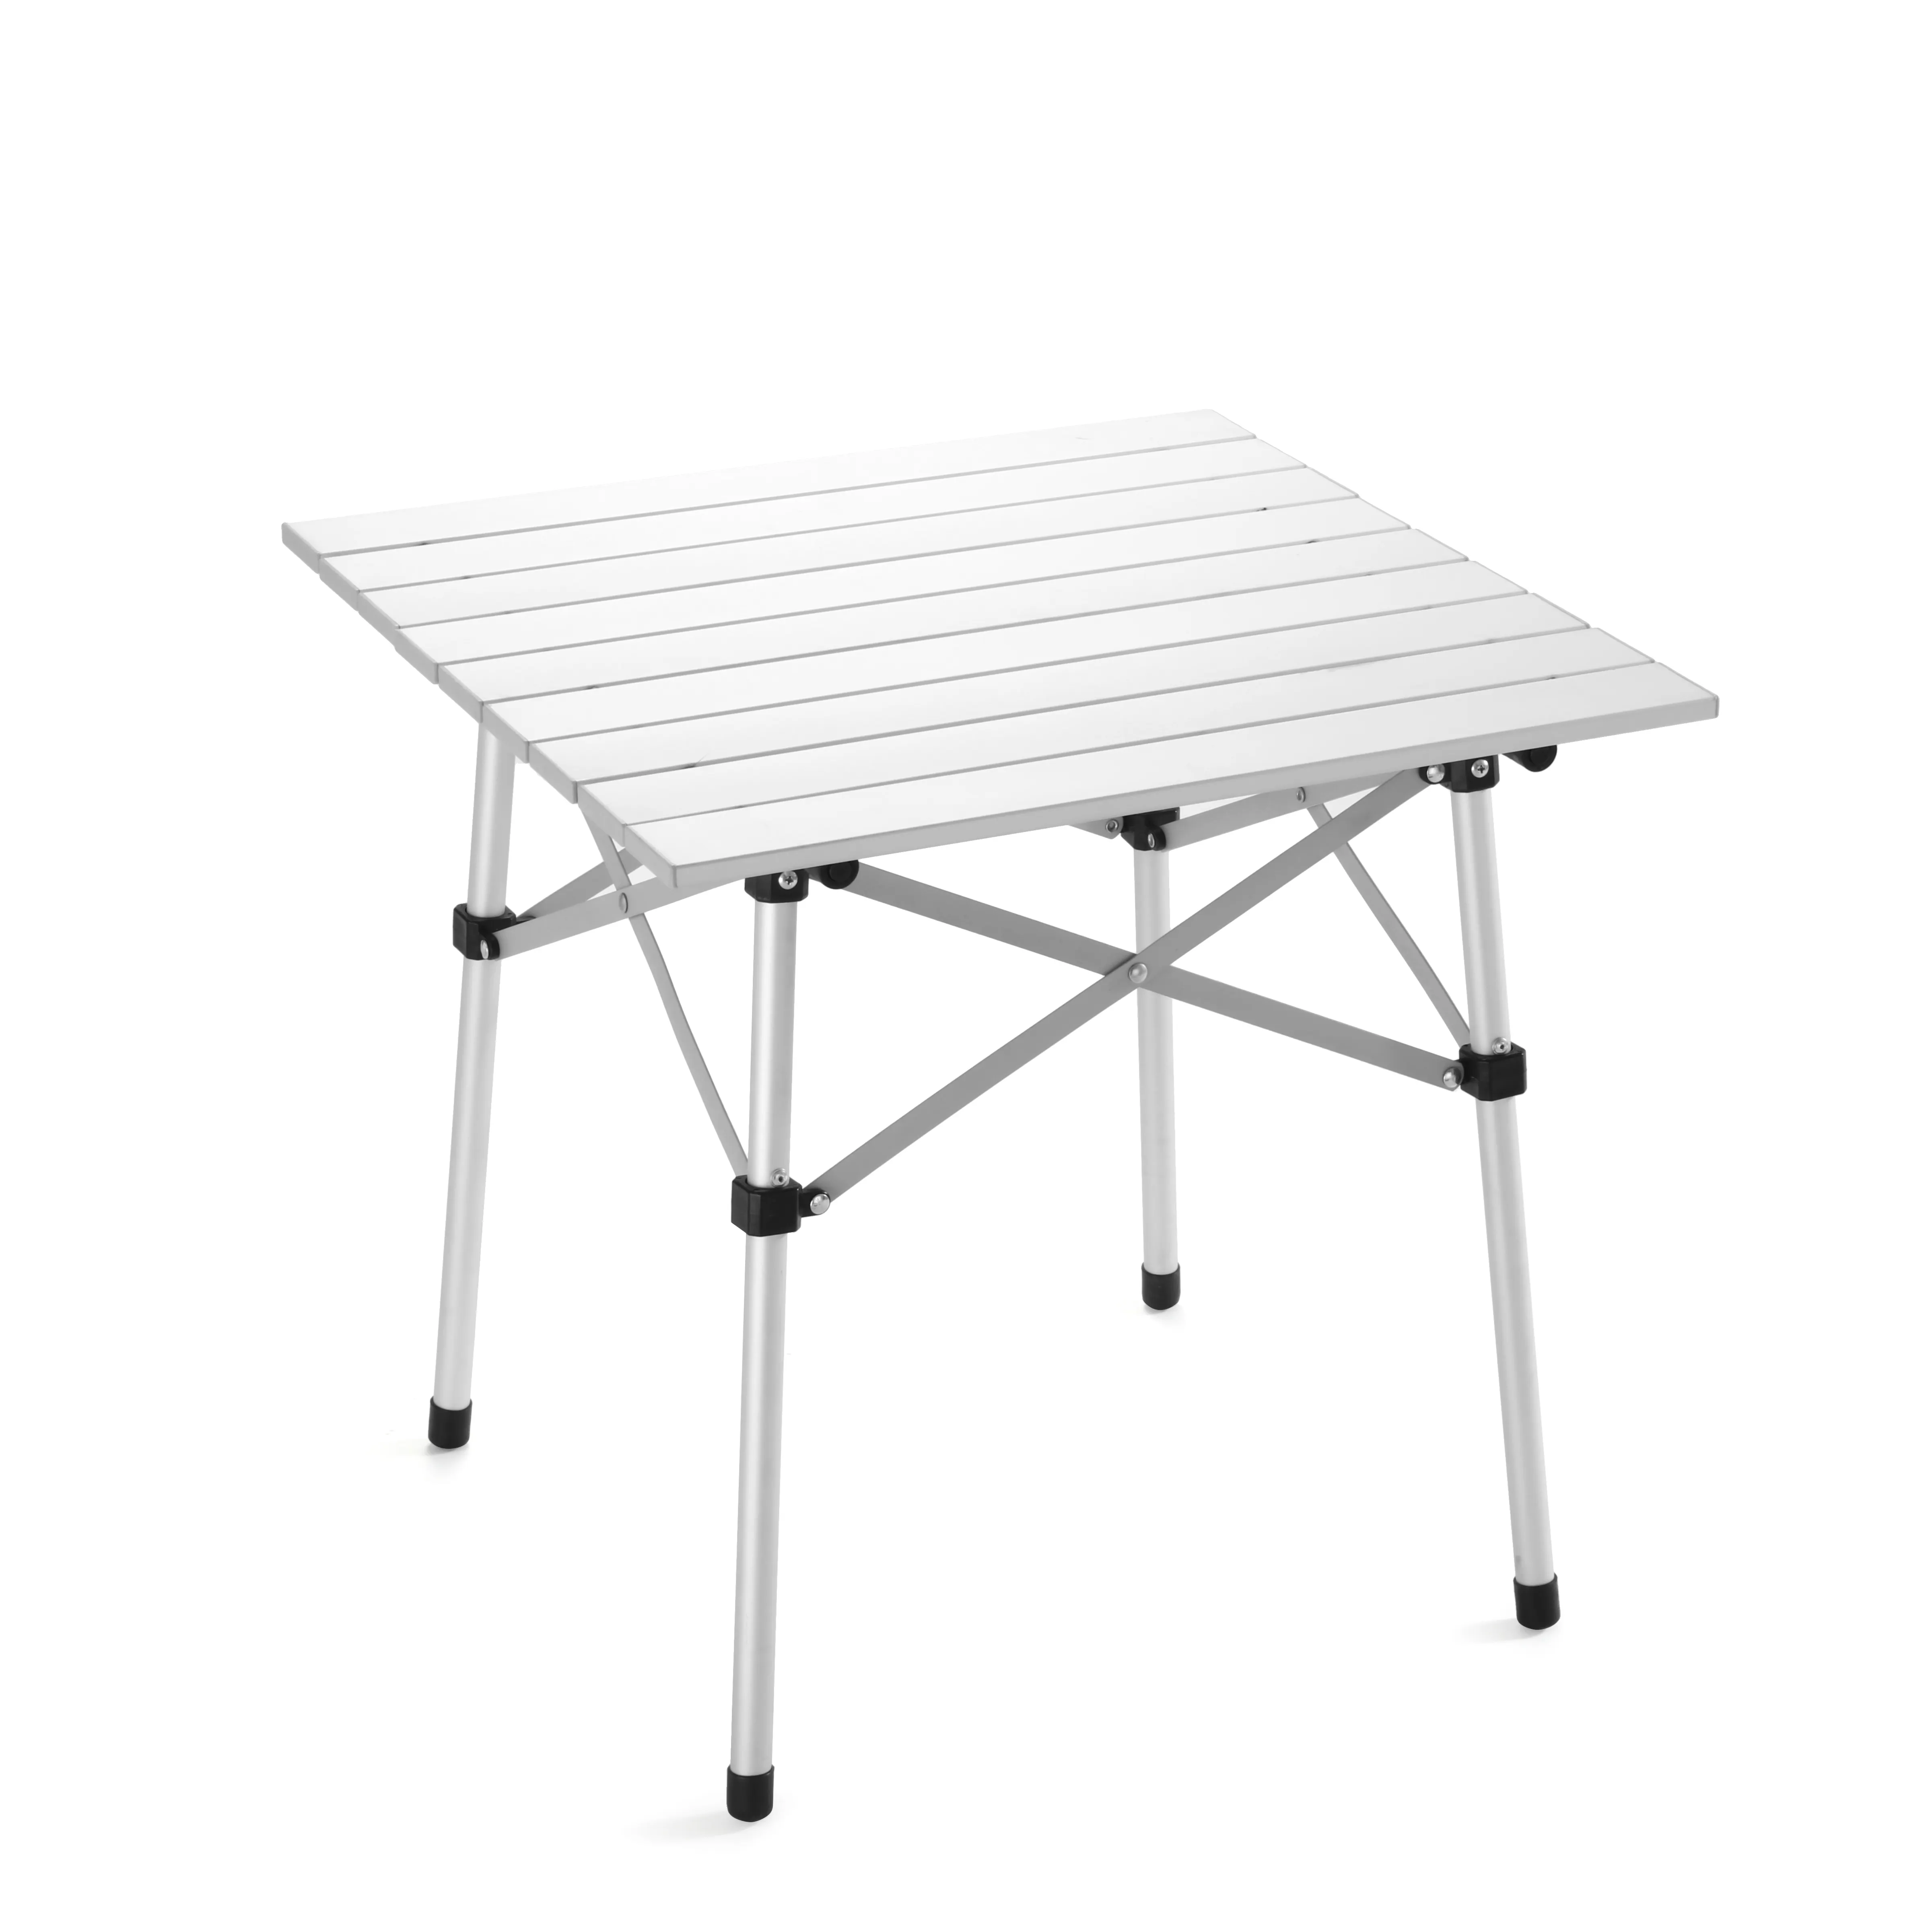 rectangular roll up aluminum panel light weight folding camp picnic table for 4 person dining tables